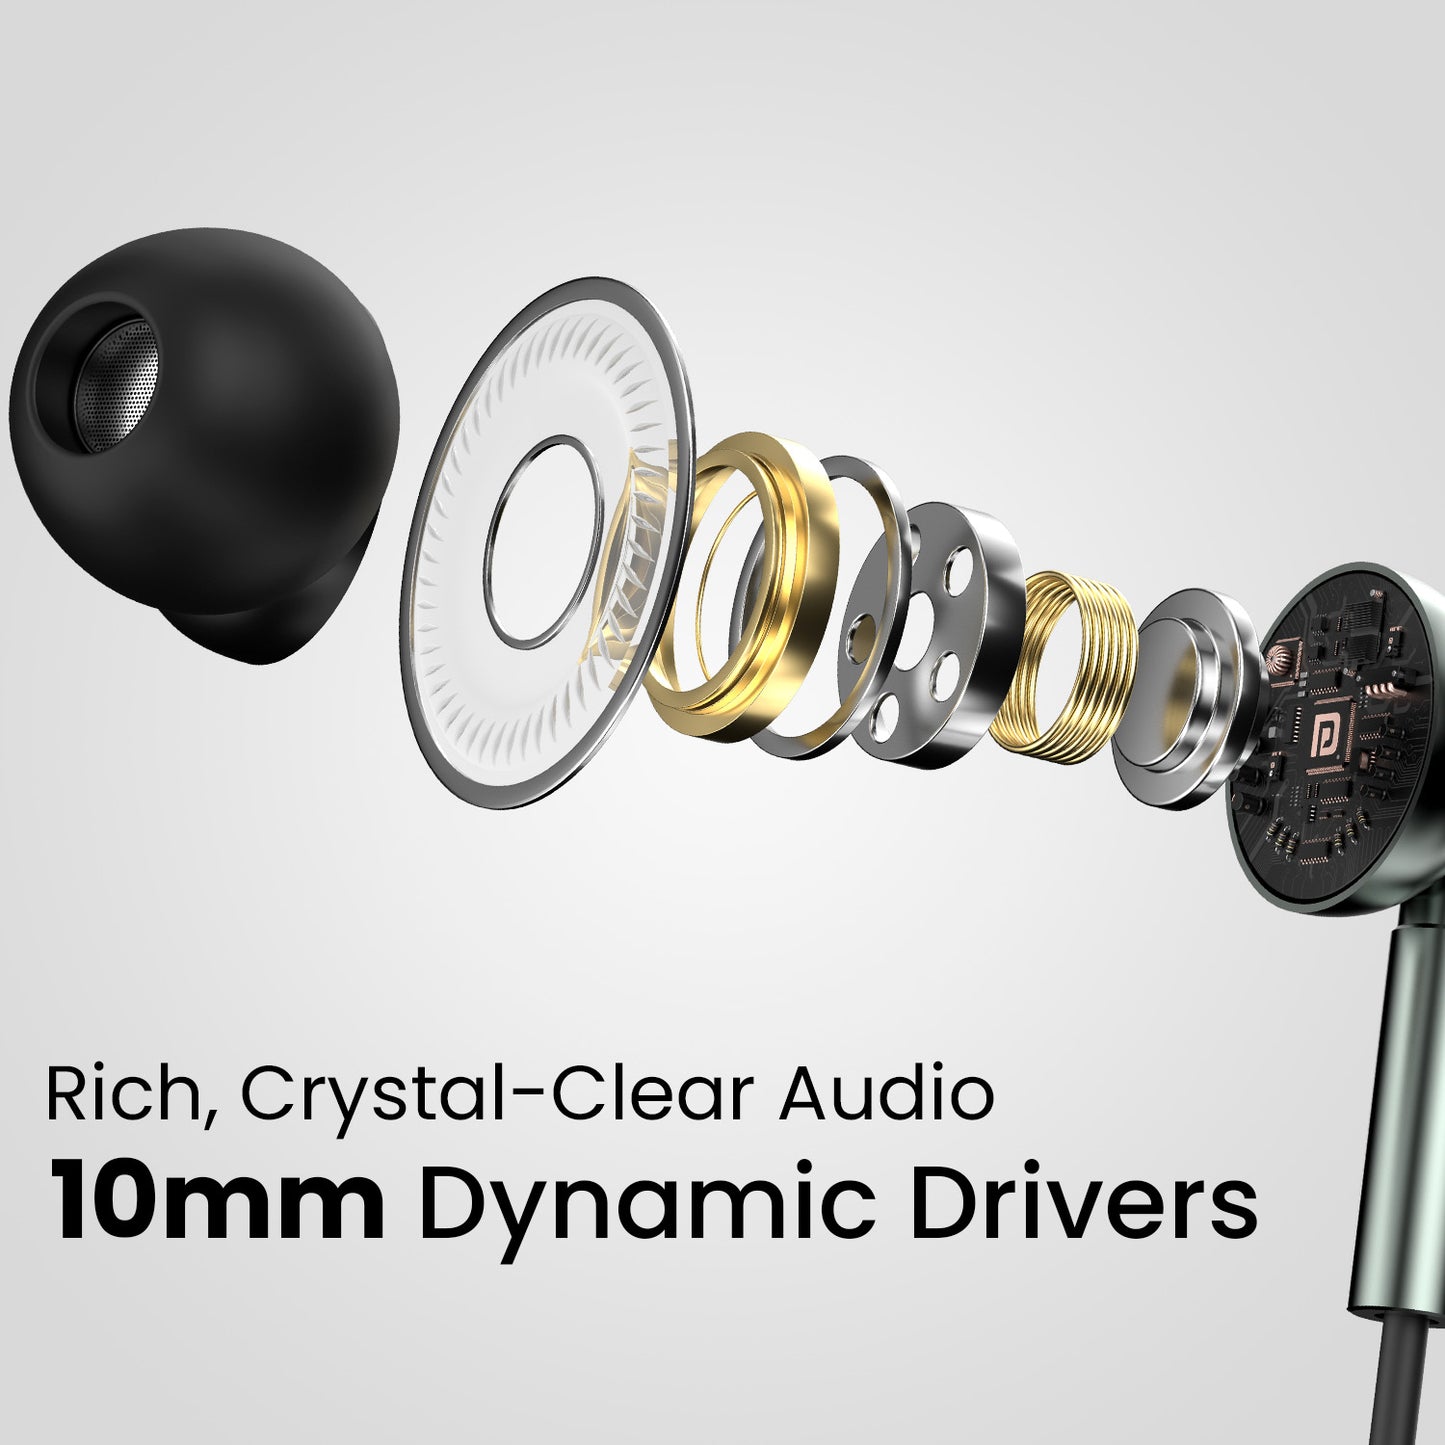 Black Portronics Conch Tune A Wired headphones| wired earphone with 10mm dynamic drivers